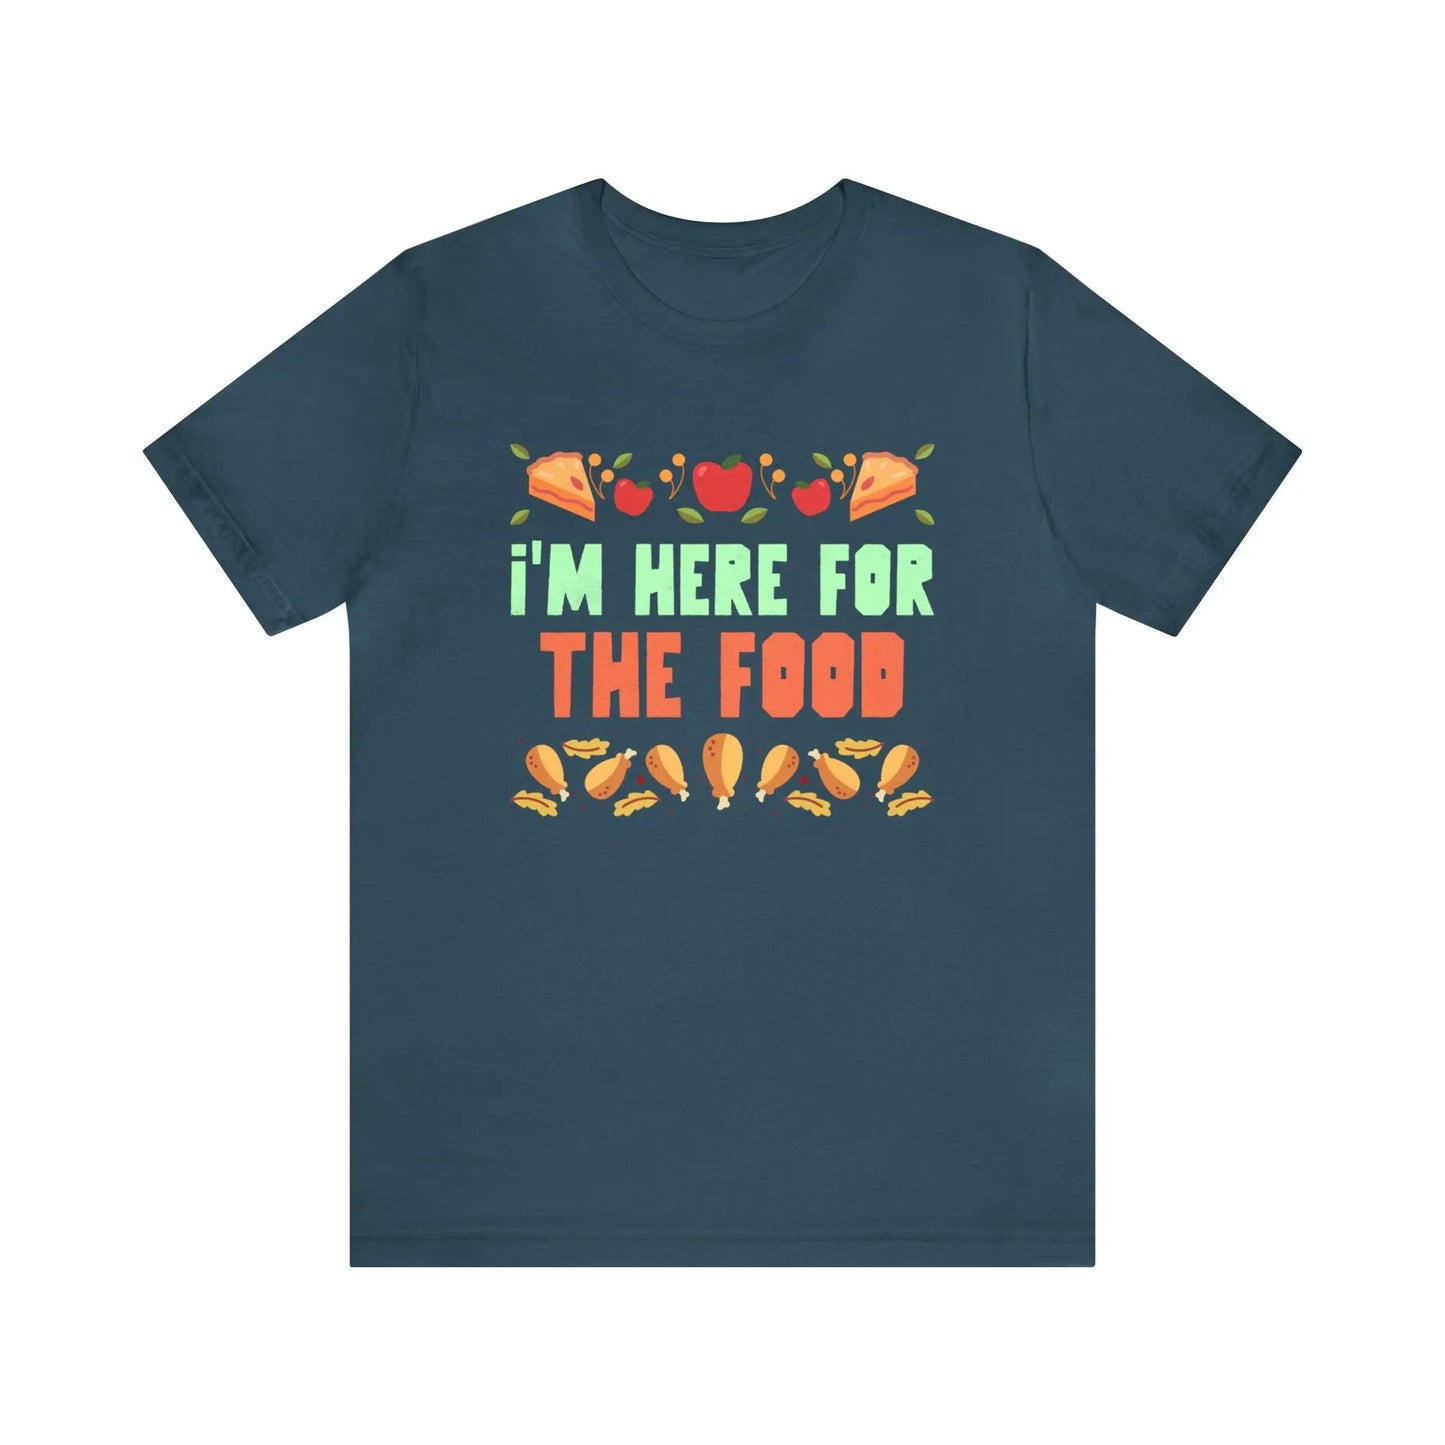 I'm Here For The Food Men's Short Sleeve Tee - Wicked Tees